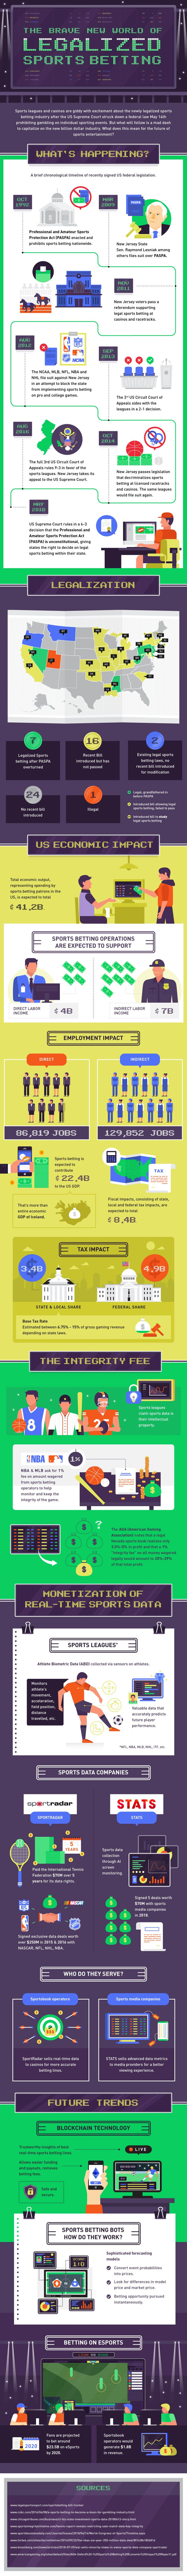 US Sports Betting Infographic